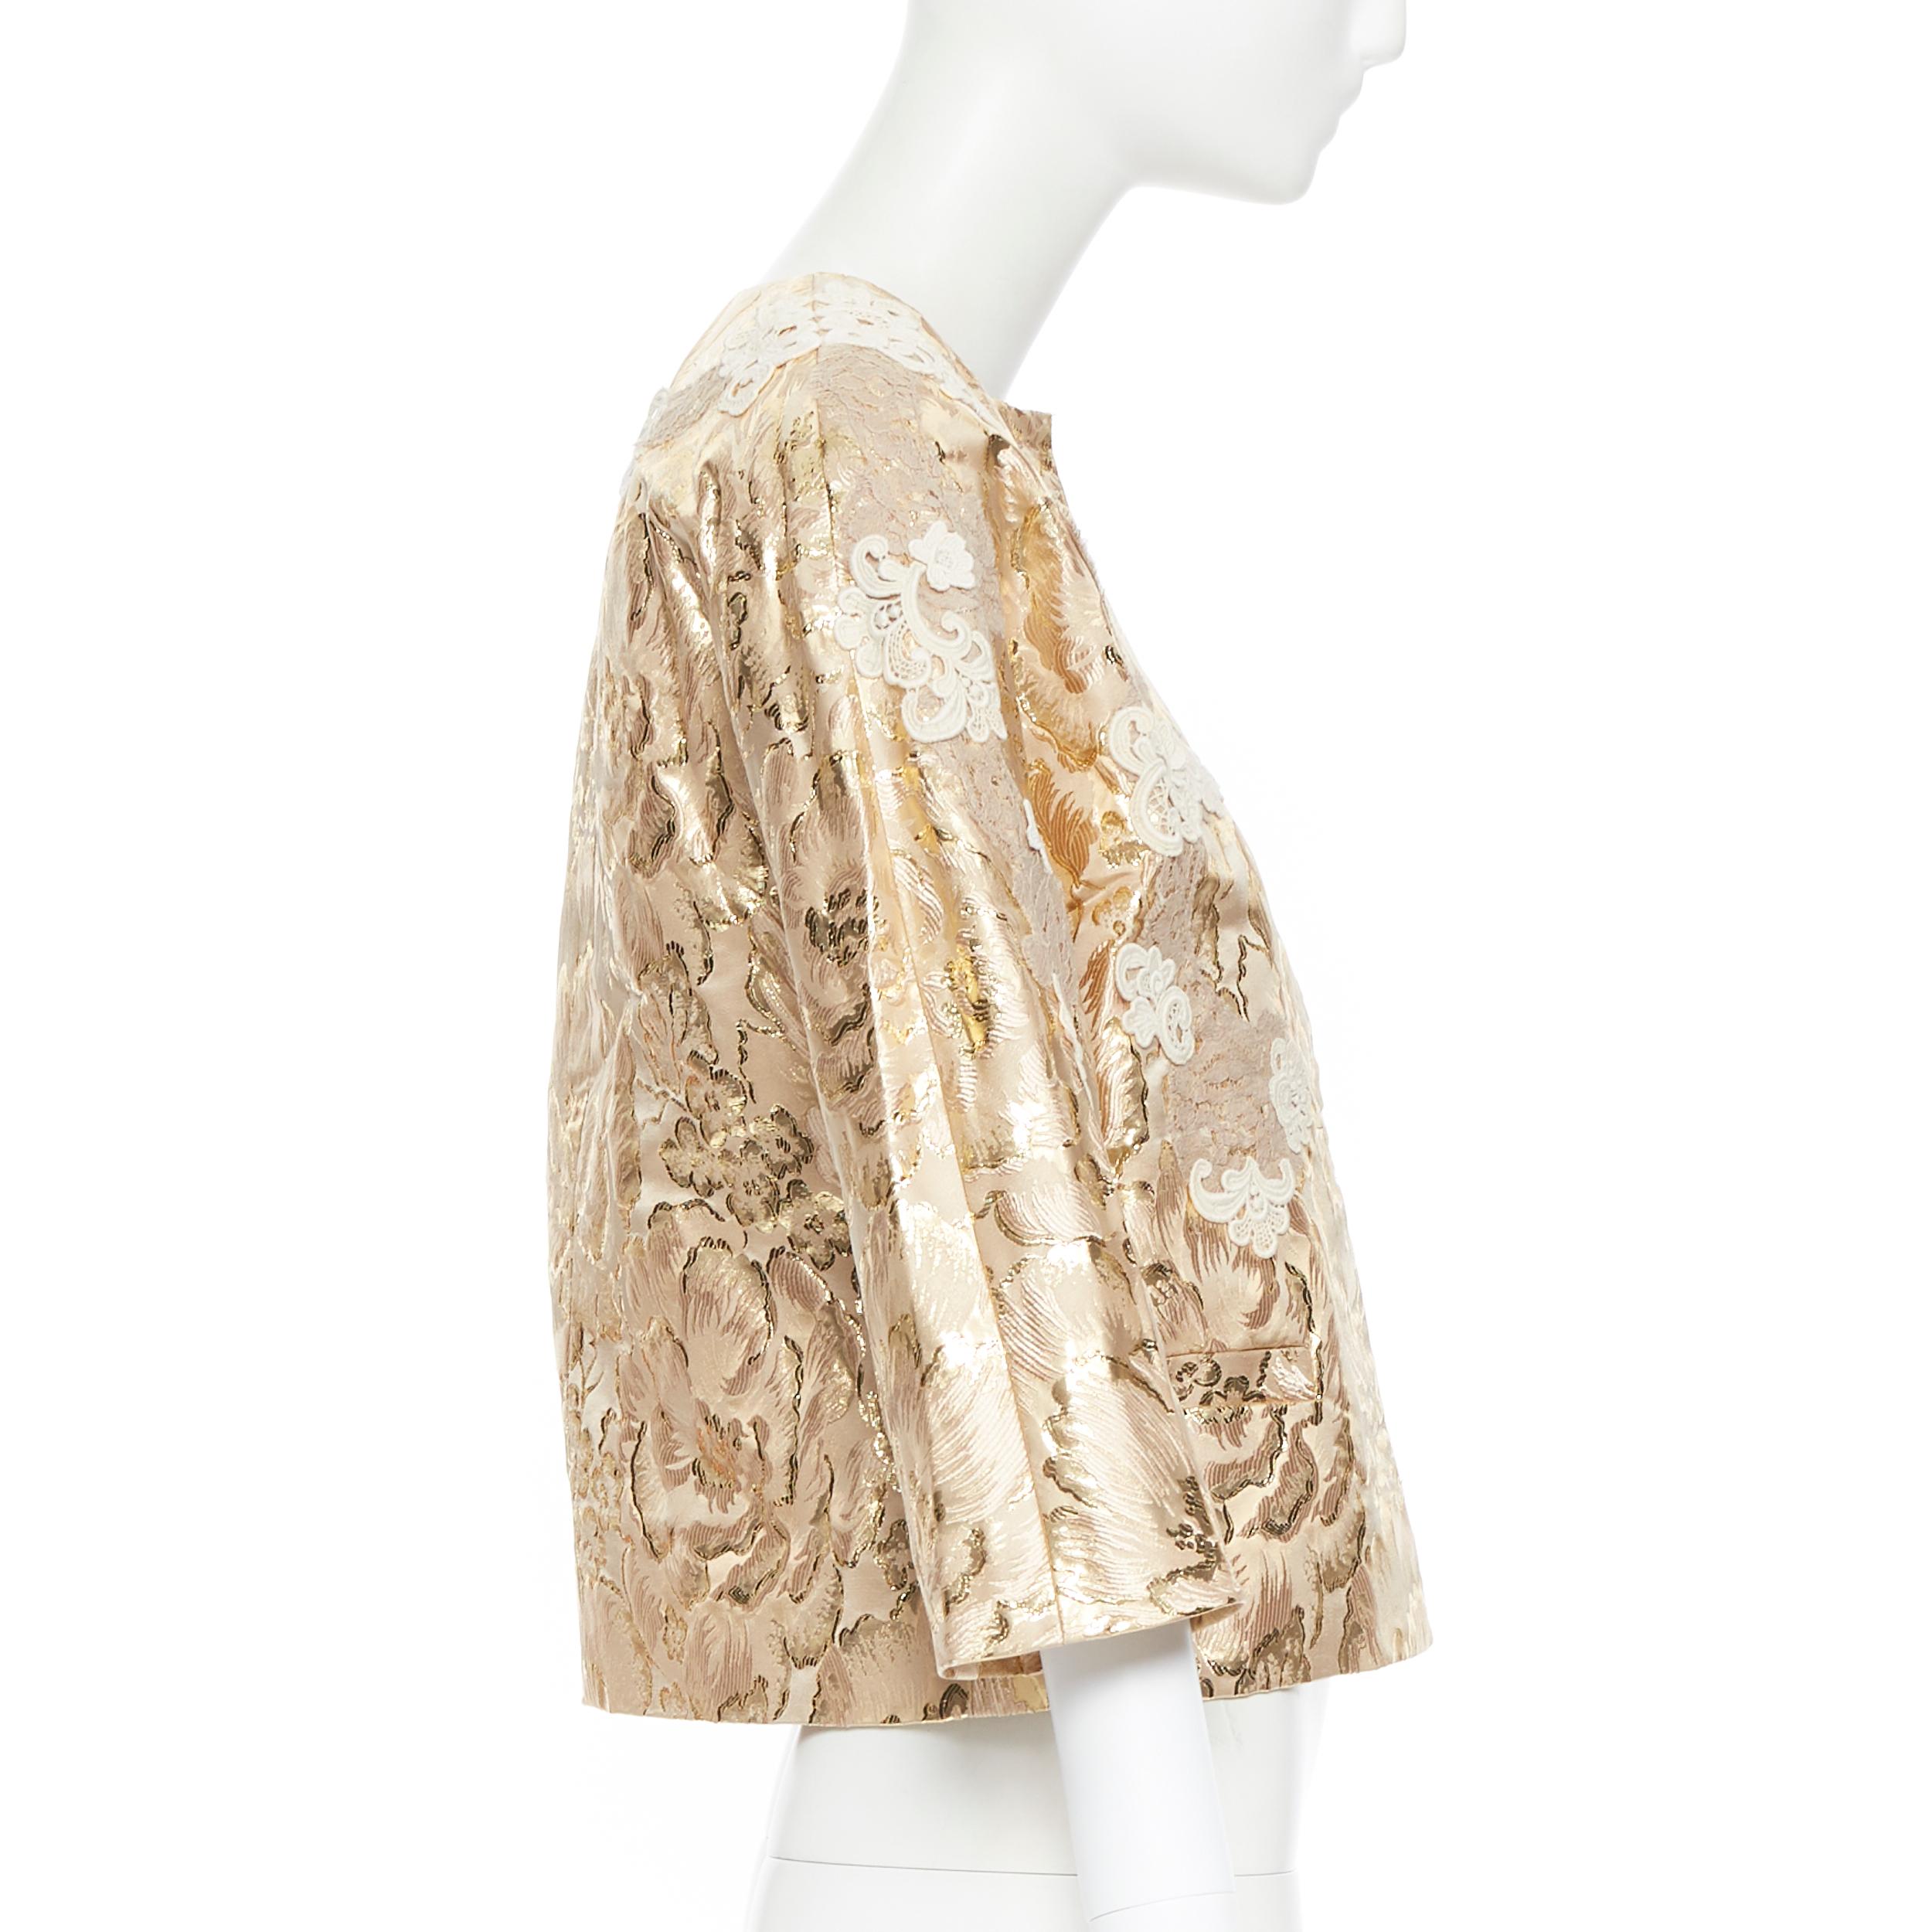 Gold new DOLCE GABBANA metallic gold lace applique floral brocade jacket IT36 XS